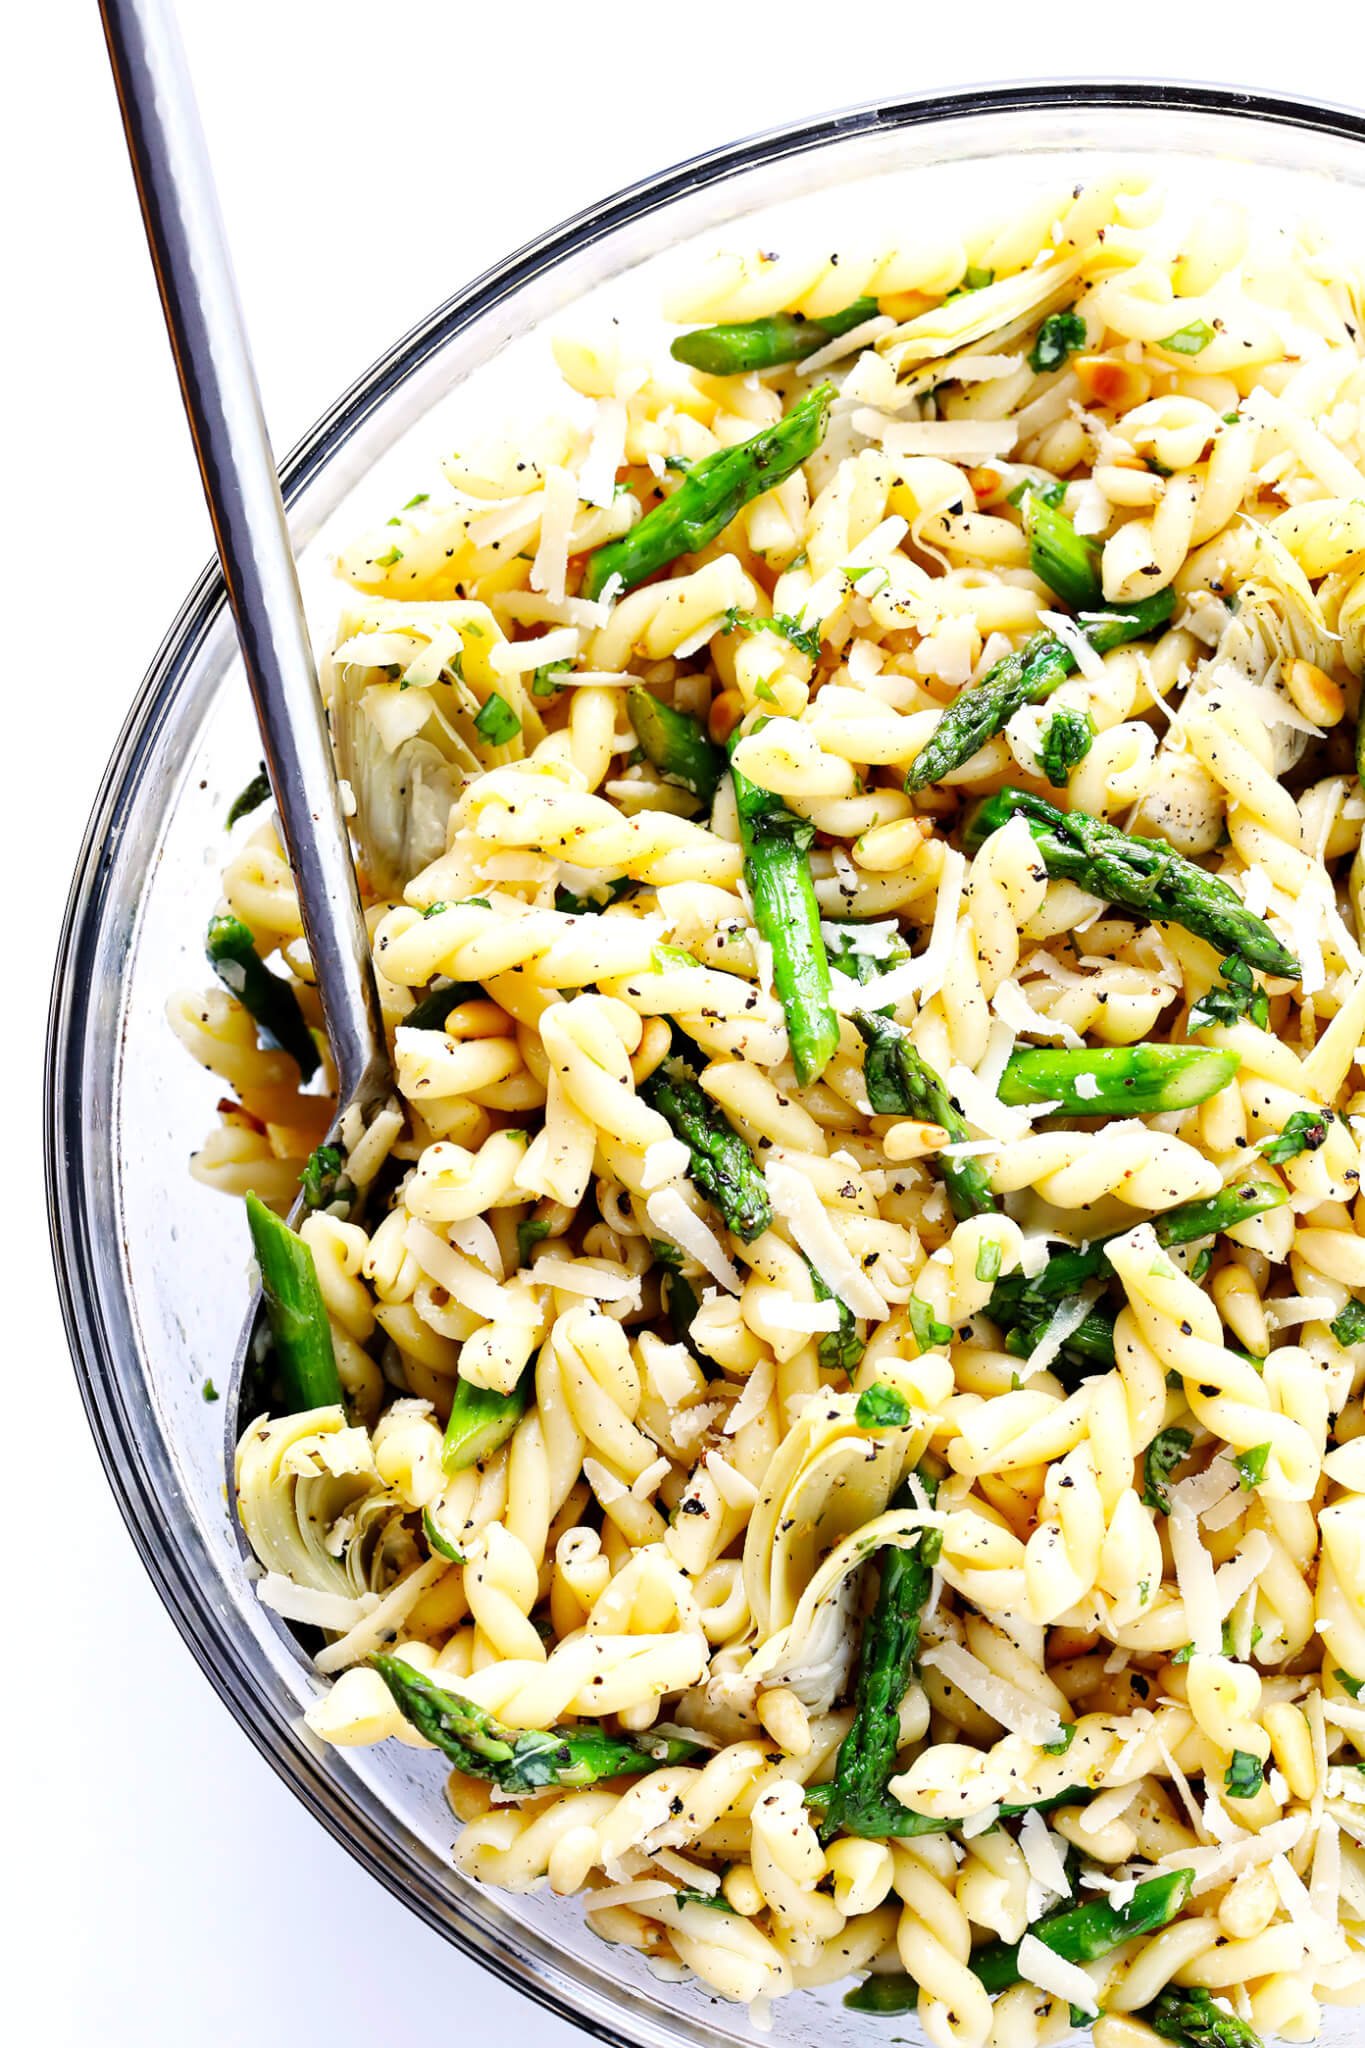 This Lemony Artichoke Pasta Salad recipe is quick and easy to make ahead, tossed with a delicious lemon-basil vinaigrette, and perfect for a picnic or porluck! | gimmesomeoven.com